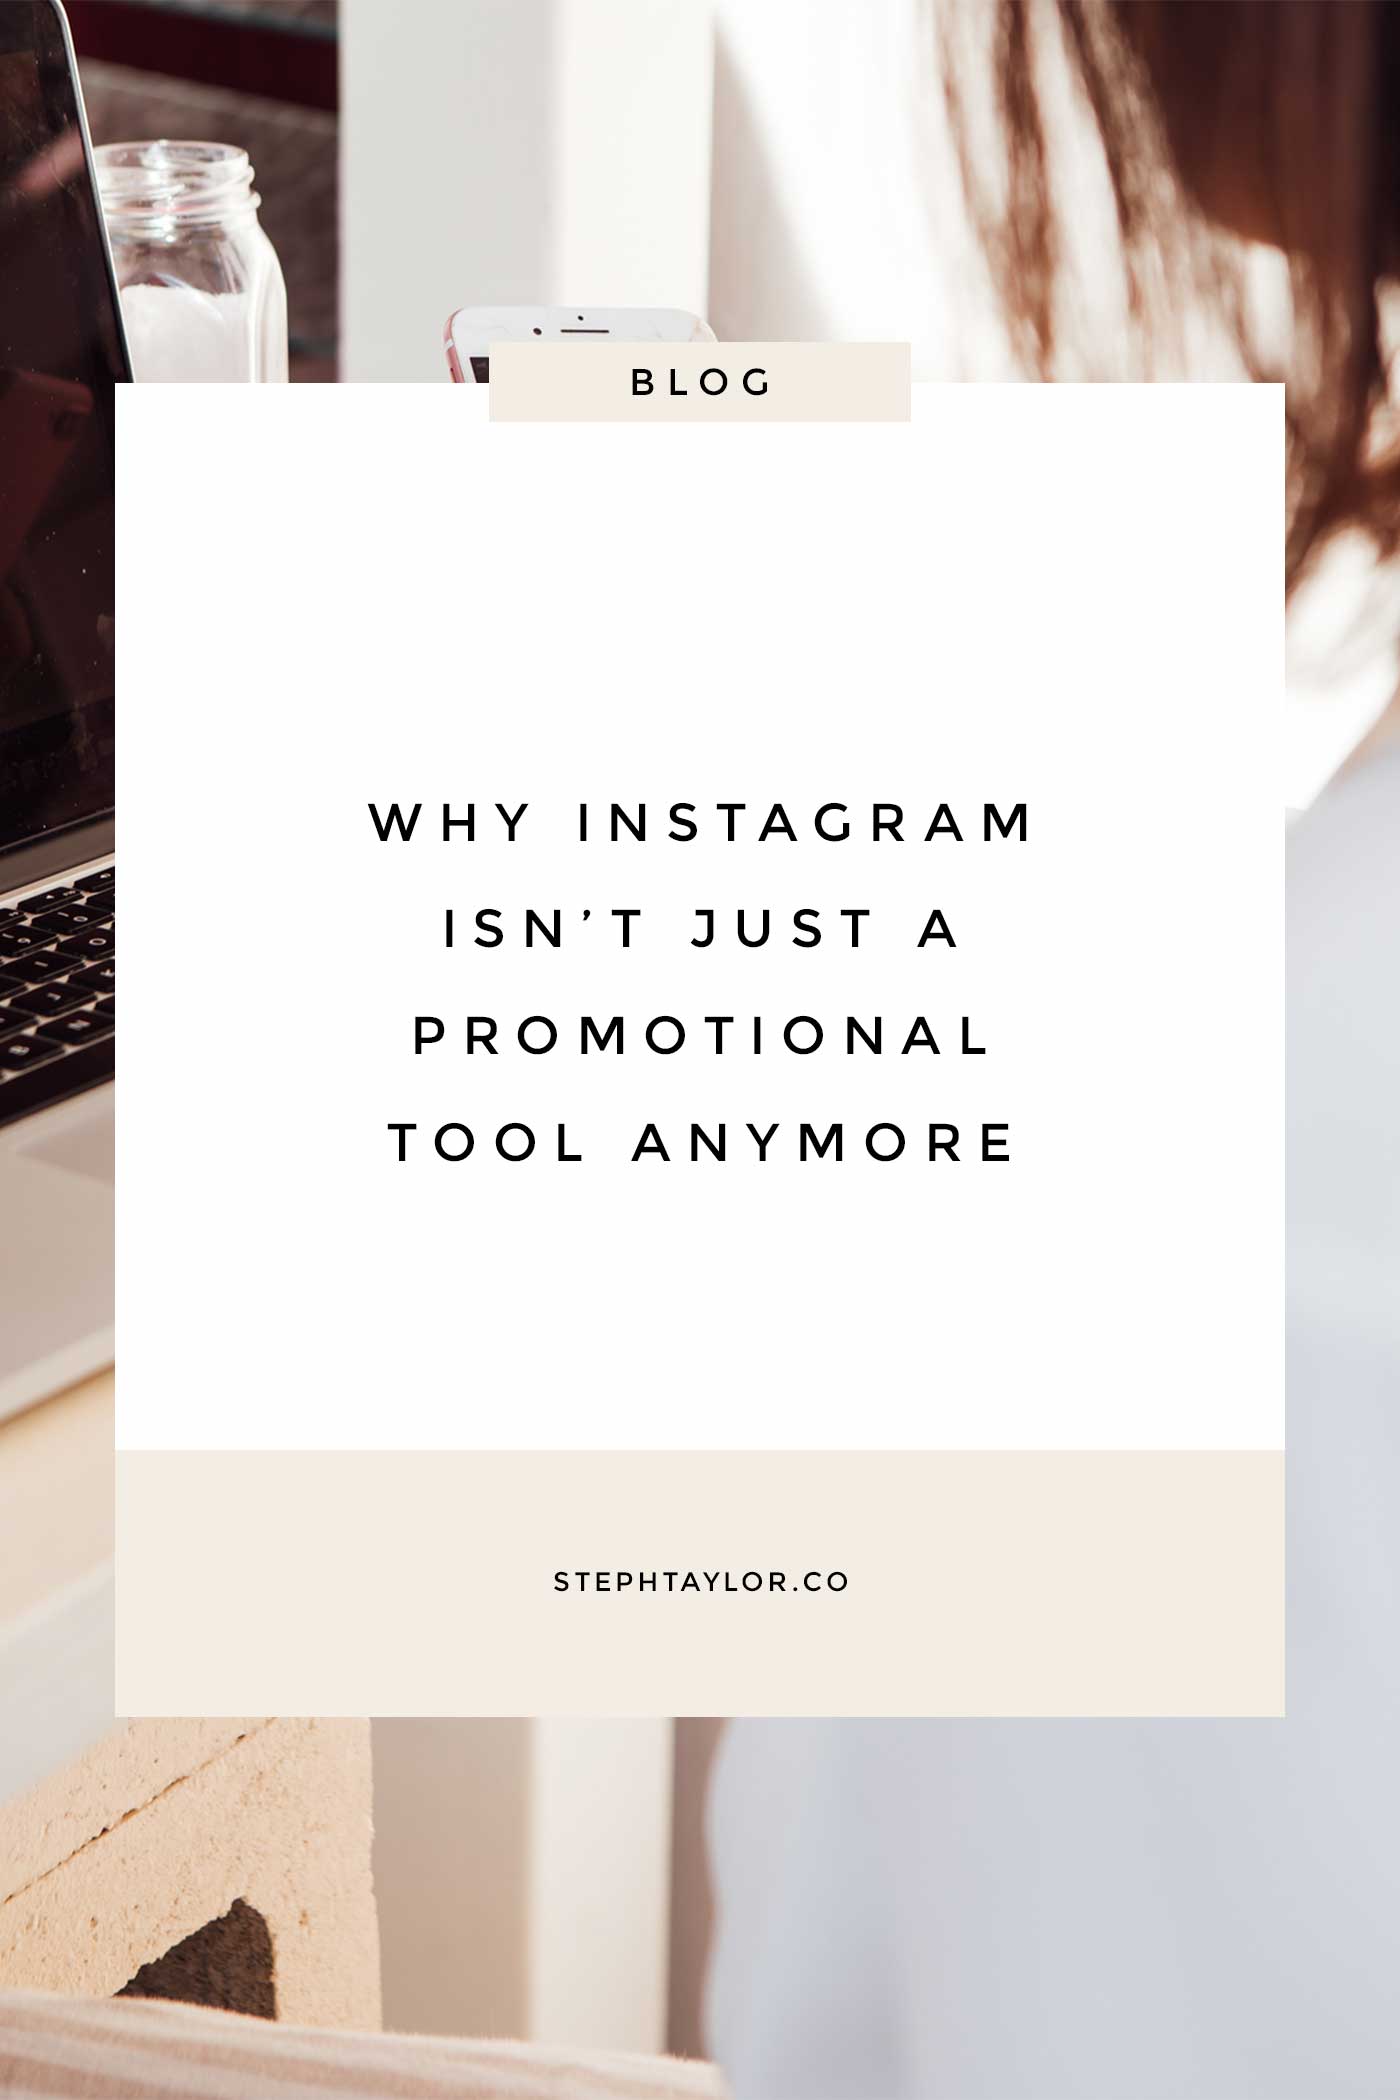 Instagram as a promotional tool